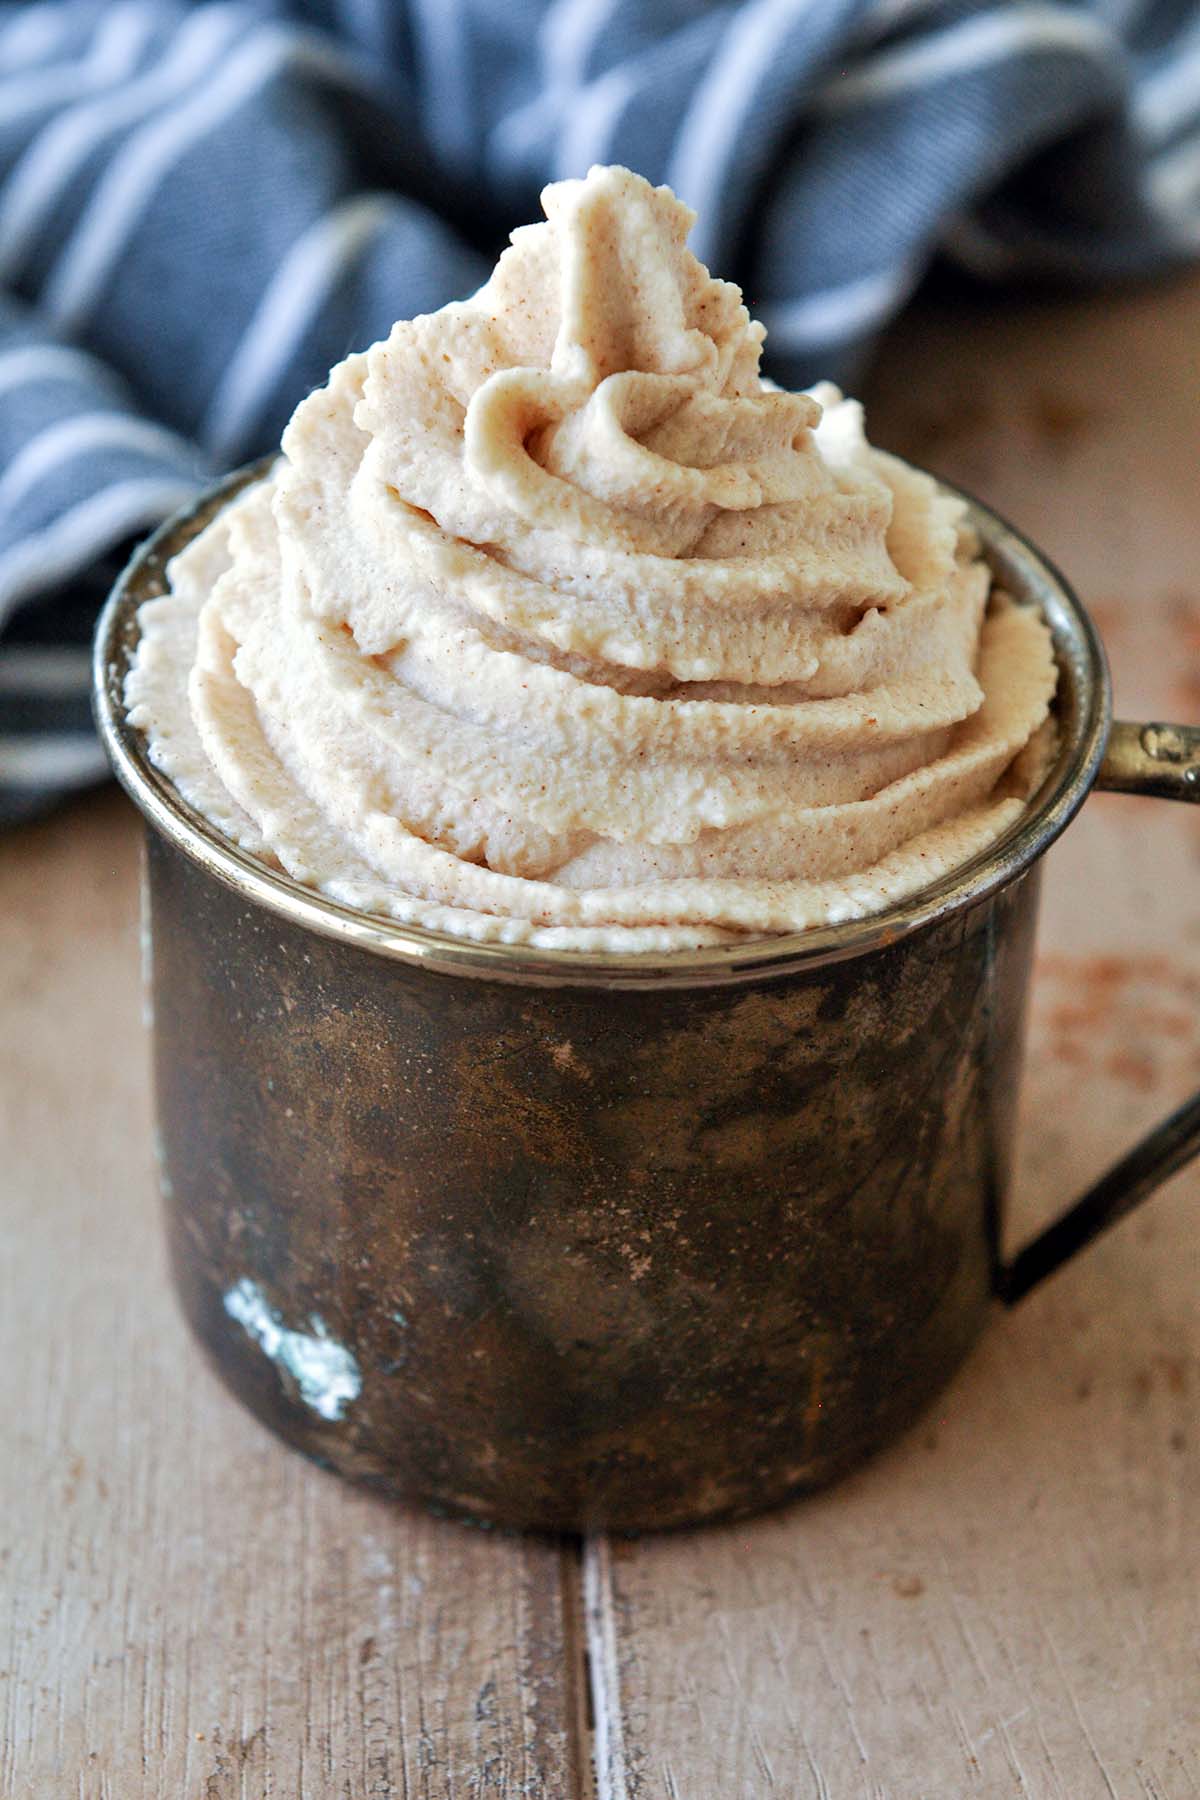 A metal cup filled with a swirl of cinnamon whipped cream with a black striped towel.